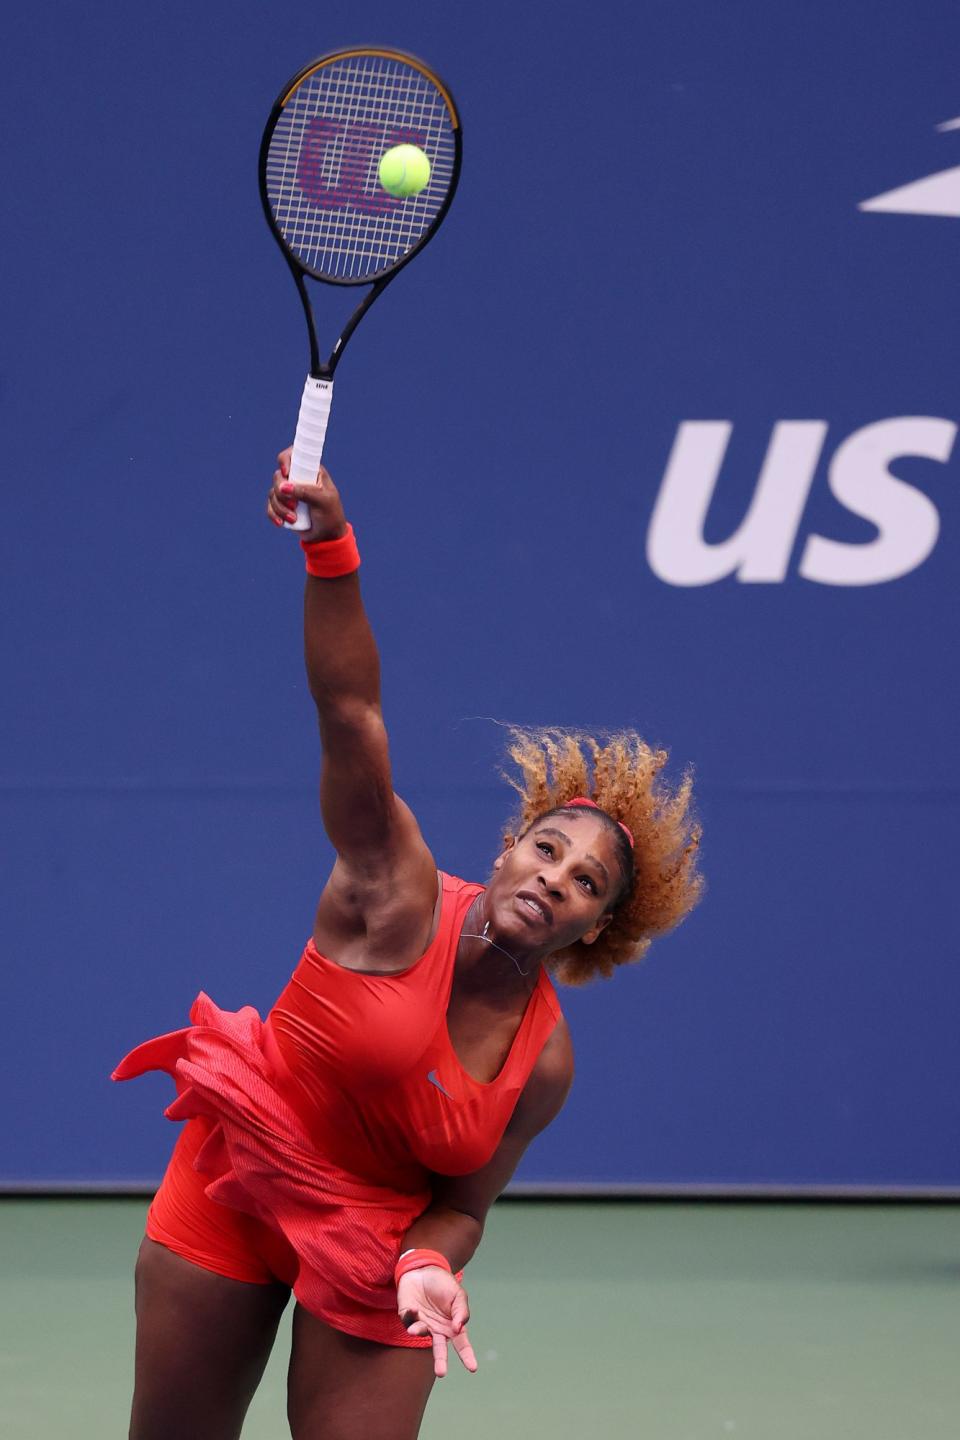 <p>Serena Williams looks powerful as she serves the ball during her women's singles match against Kristie Ahn at the 2020 US Open in N.Y.C. </p>